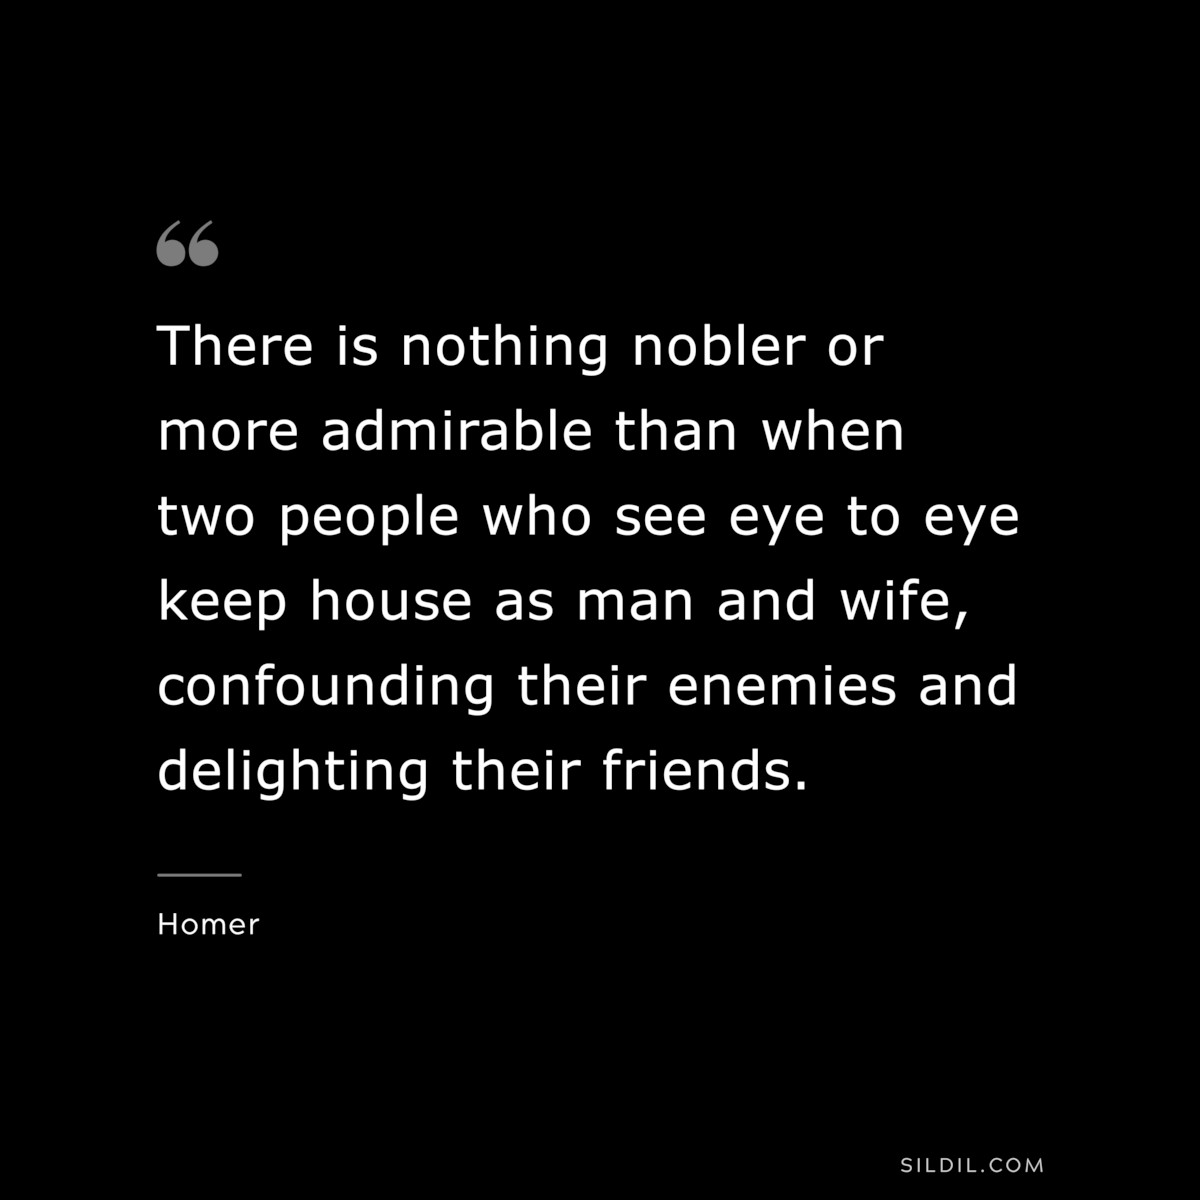 There is nothing nobler or more admirable than when two people who see eye to eye keep house as man and wife, confounding their enemies and delighting their friends. ― Homer